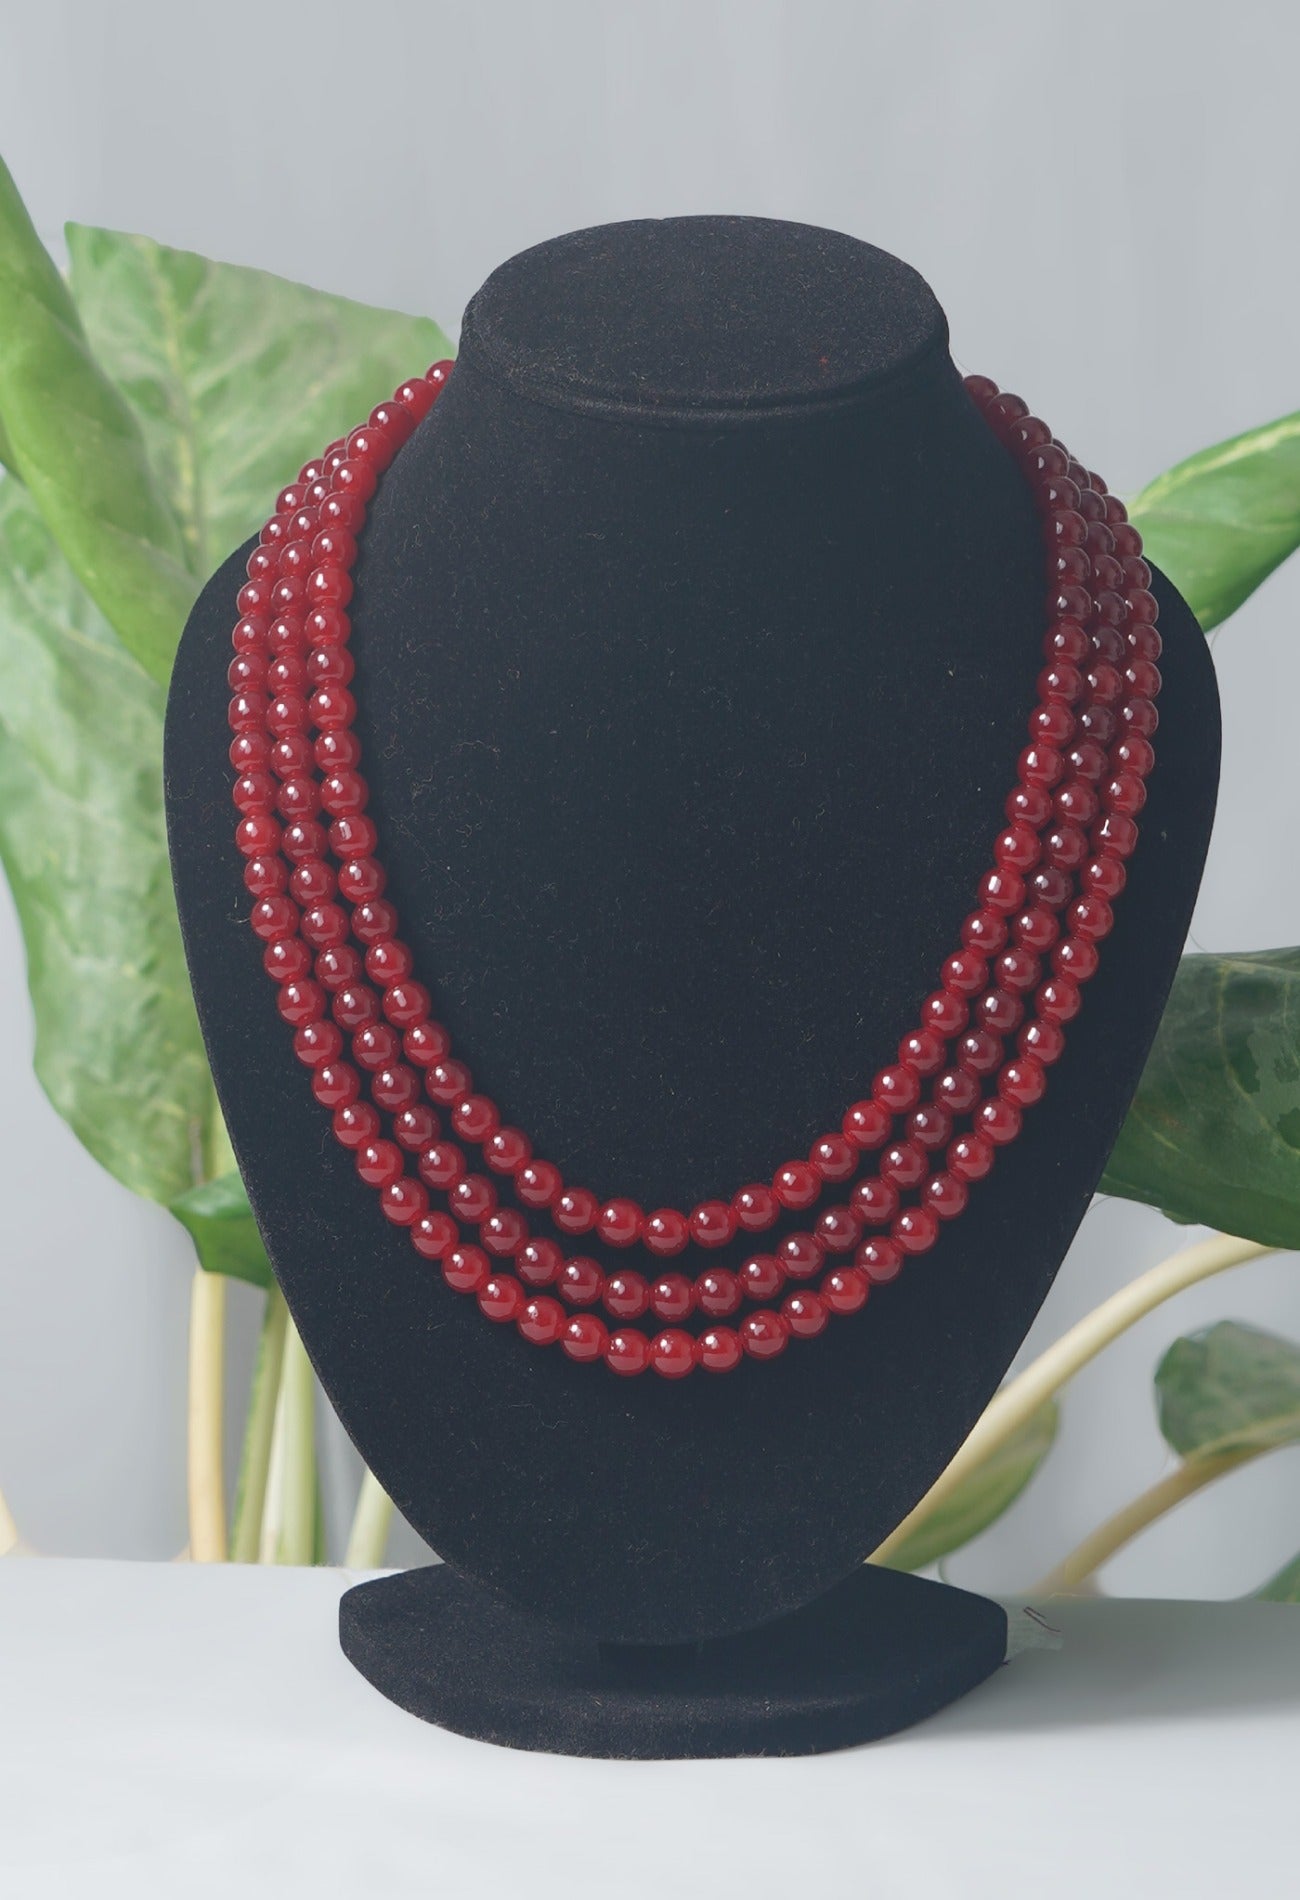 Online Shopping for Maroon Amravati Round Beads Necklace with Pendent with jewellery from Andhra pradesh at Unnatisilks.com India
